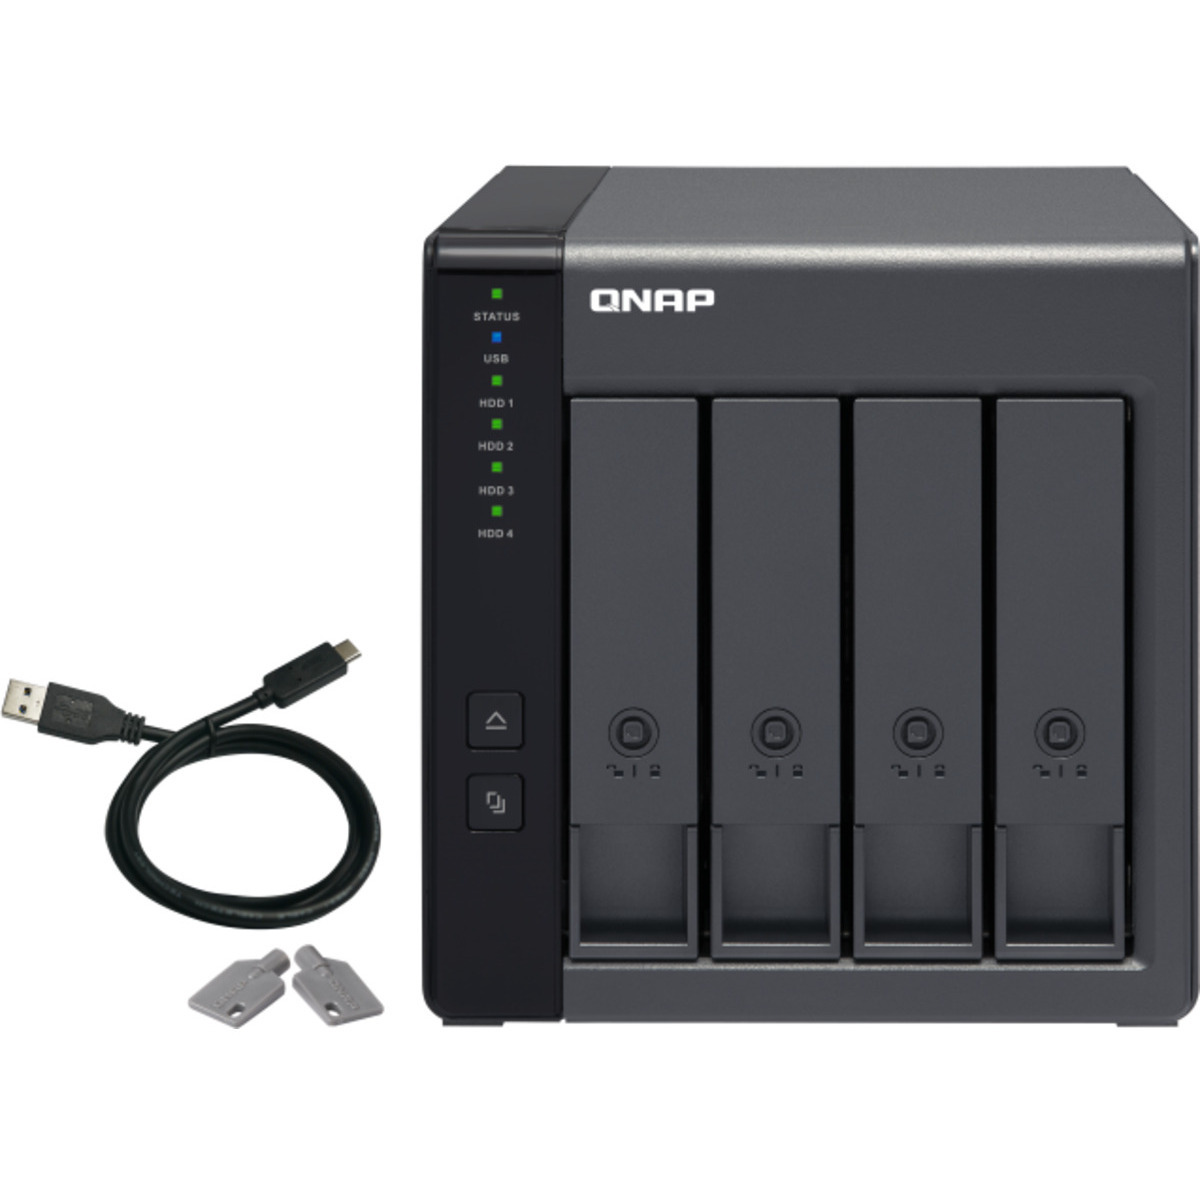 QNAP TR-004 External Expansion Drive 36tb 4-Bay Desktop Multimedia / Power User / Business Expansion Enclosure 3x12tb Seagate IronWolf Pro ST12000NT001 3.5 7200rpm SATA 6Gb/s HDD NAS Class Drives Installed - Burn-In Tested - ON SALE TR-004 External Expansion Drive